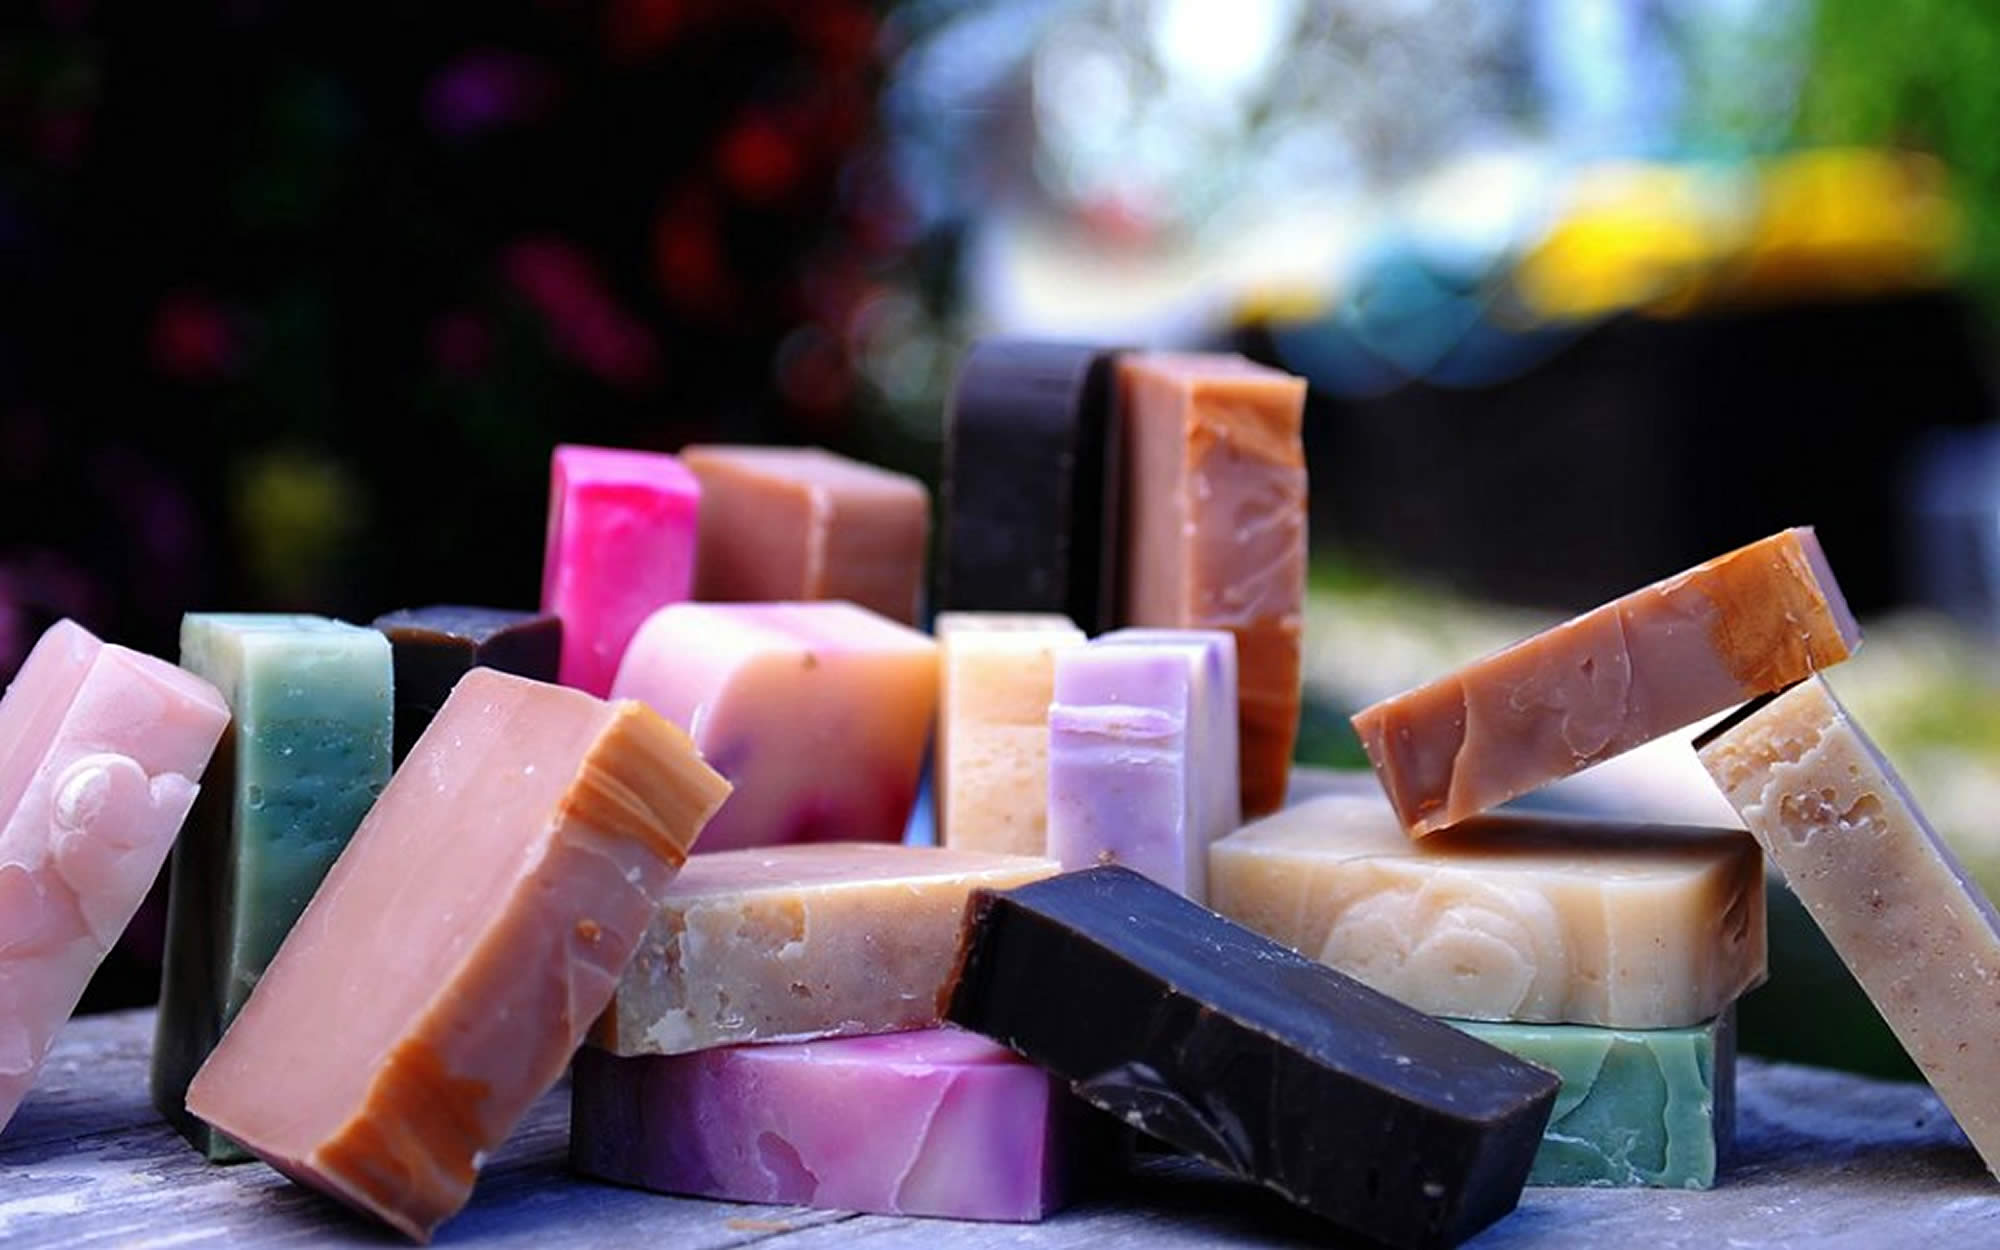 Handmade Soaps are Much Better For You